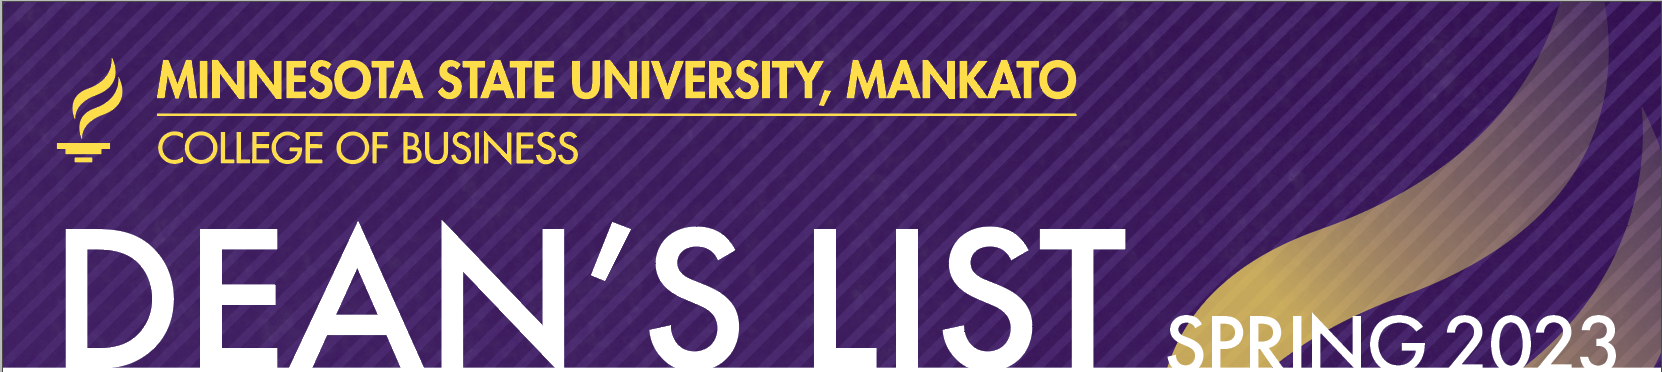 a purple and yellow striped background with white letters